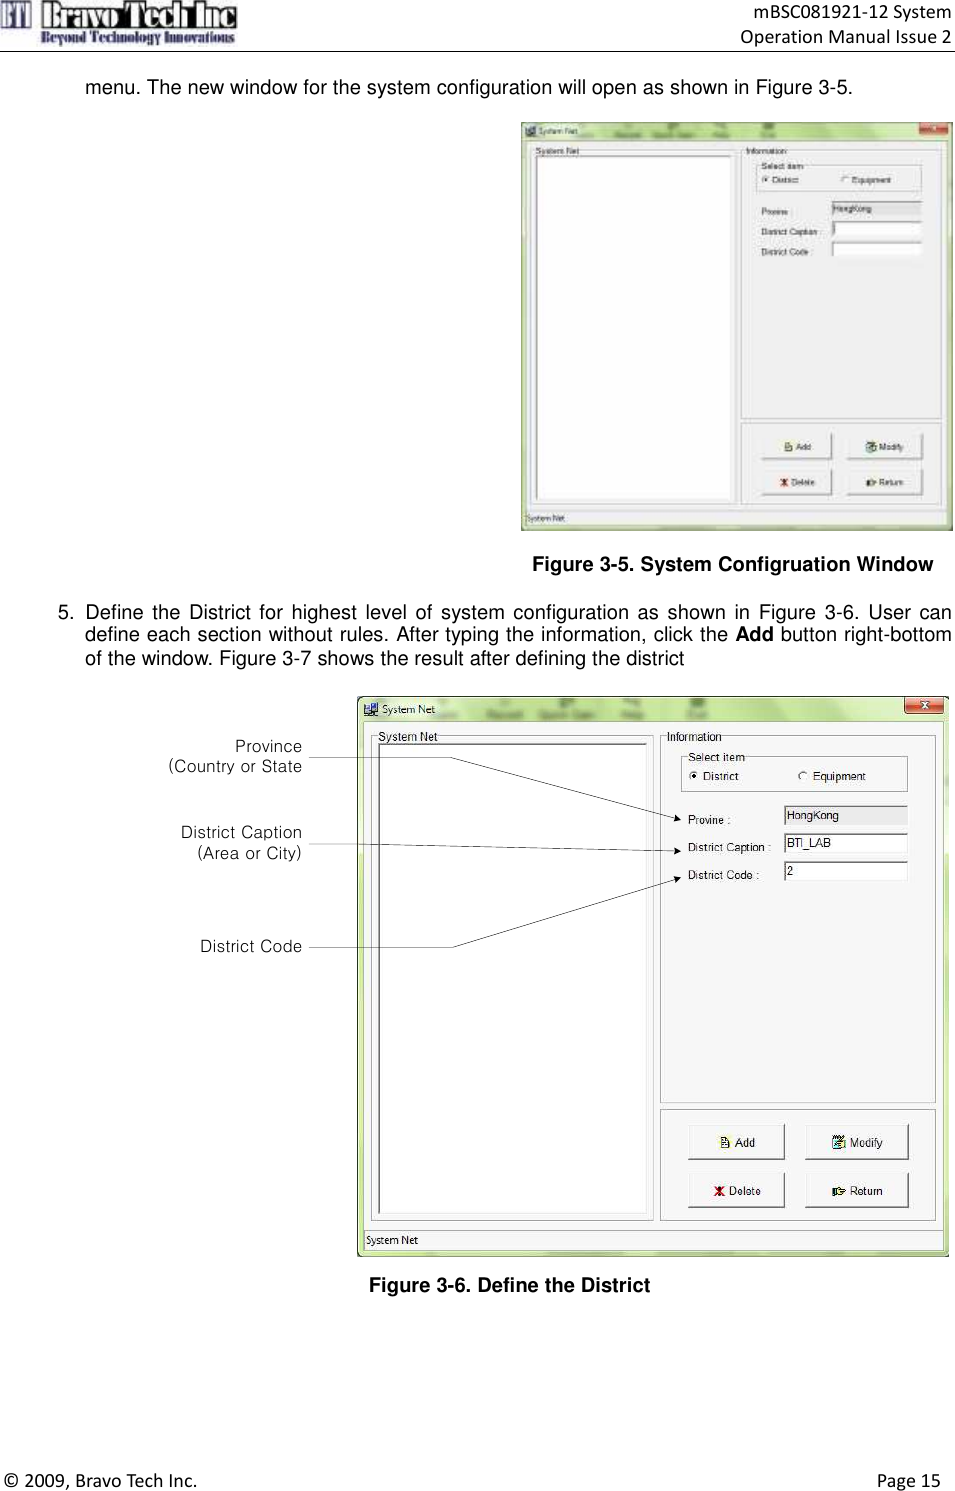                                    mBSC081921-12 System Operation Manual Issue 2  © 2009, Bravo Tech Inc.                                                                                                                                      Page 15  menu. The new window for the system configuration will open as shown in Figure 3-5.    Figure 3-5. System Configruation Window  5.  Define the District for highest level of system configuration as shown in Figure 3-6. User can define each section without rules. After typing the information, click the Add button right-bottom of the window. Figure 3-7 shows the result after defining the district            Province(Country or StateDistrict Caption(Area or City)District Code Figure 3-6. Define the District   